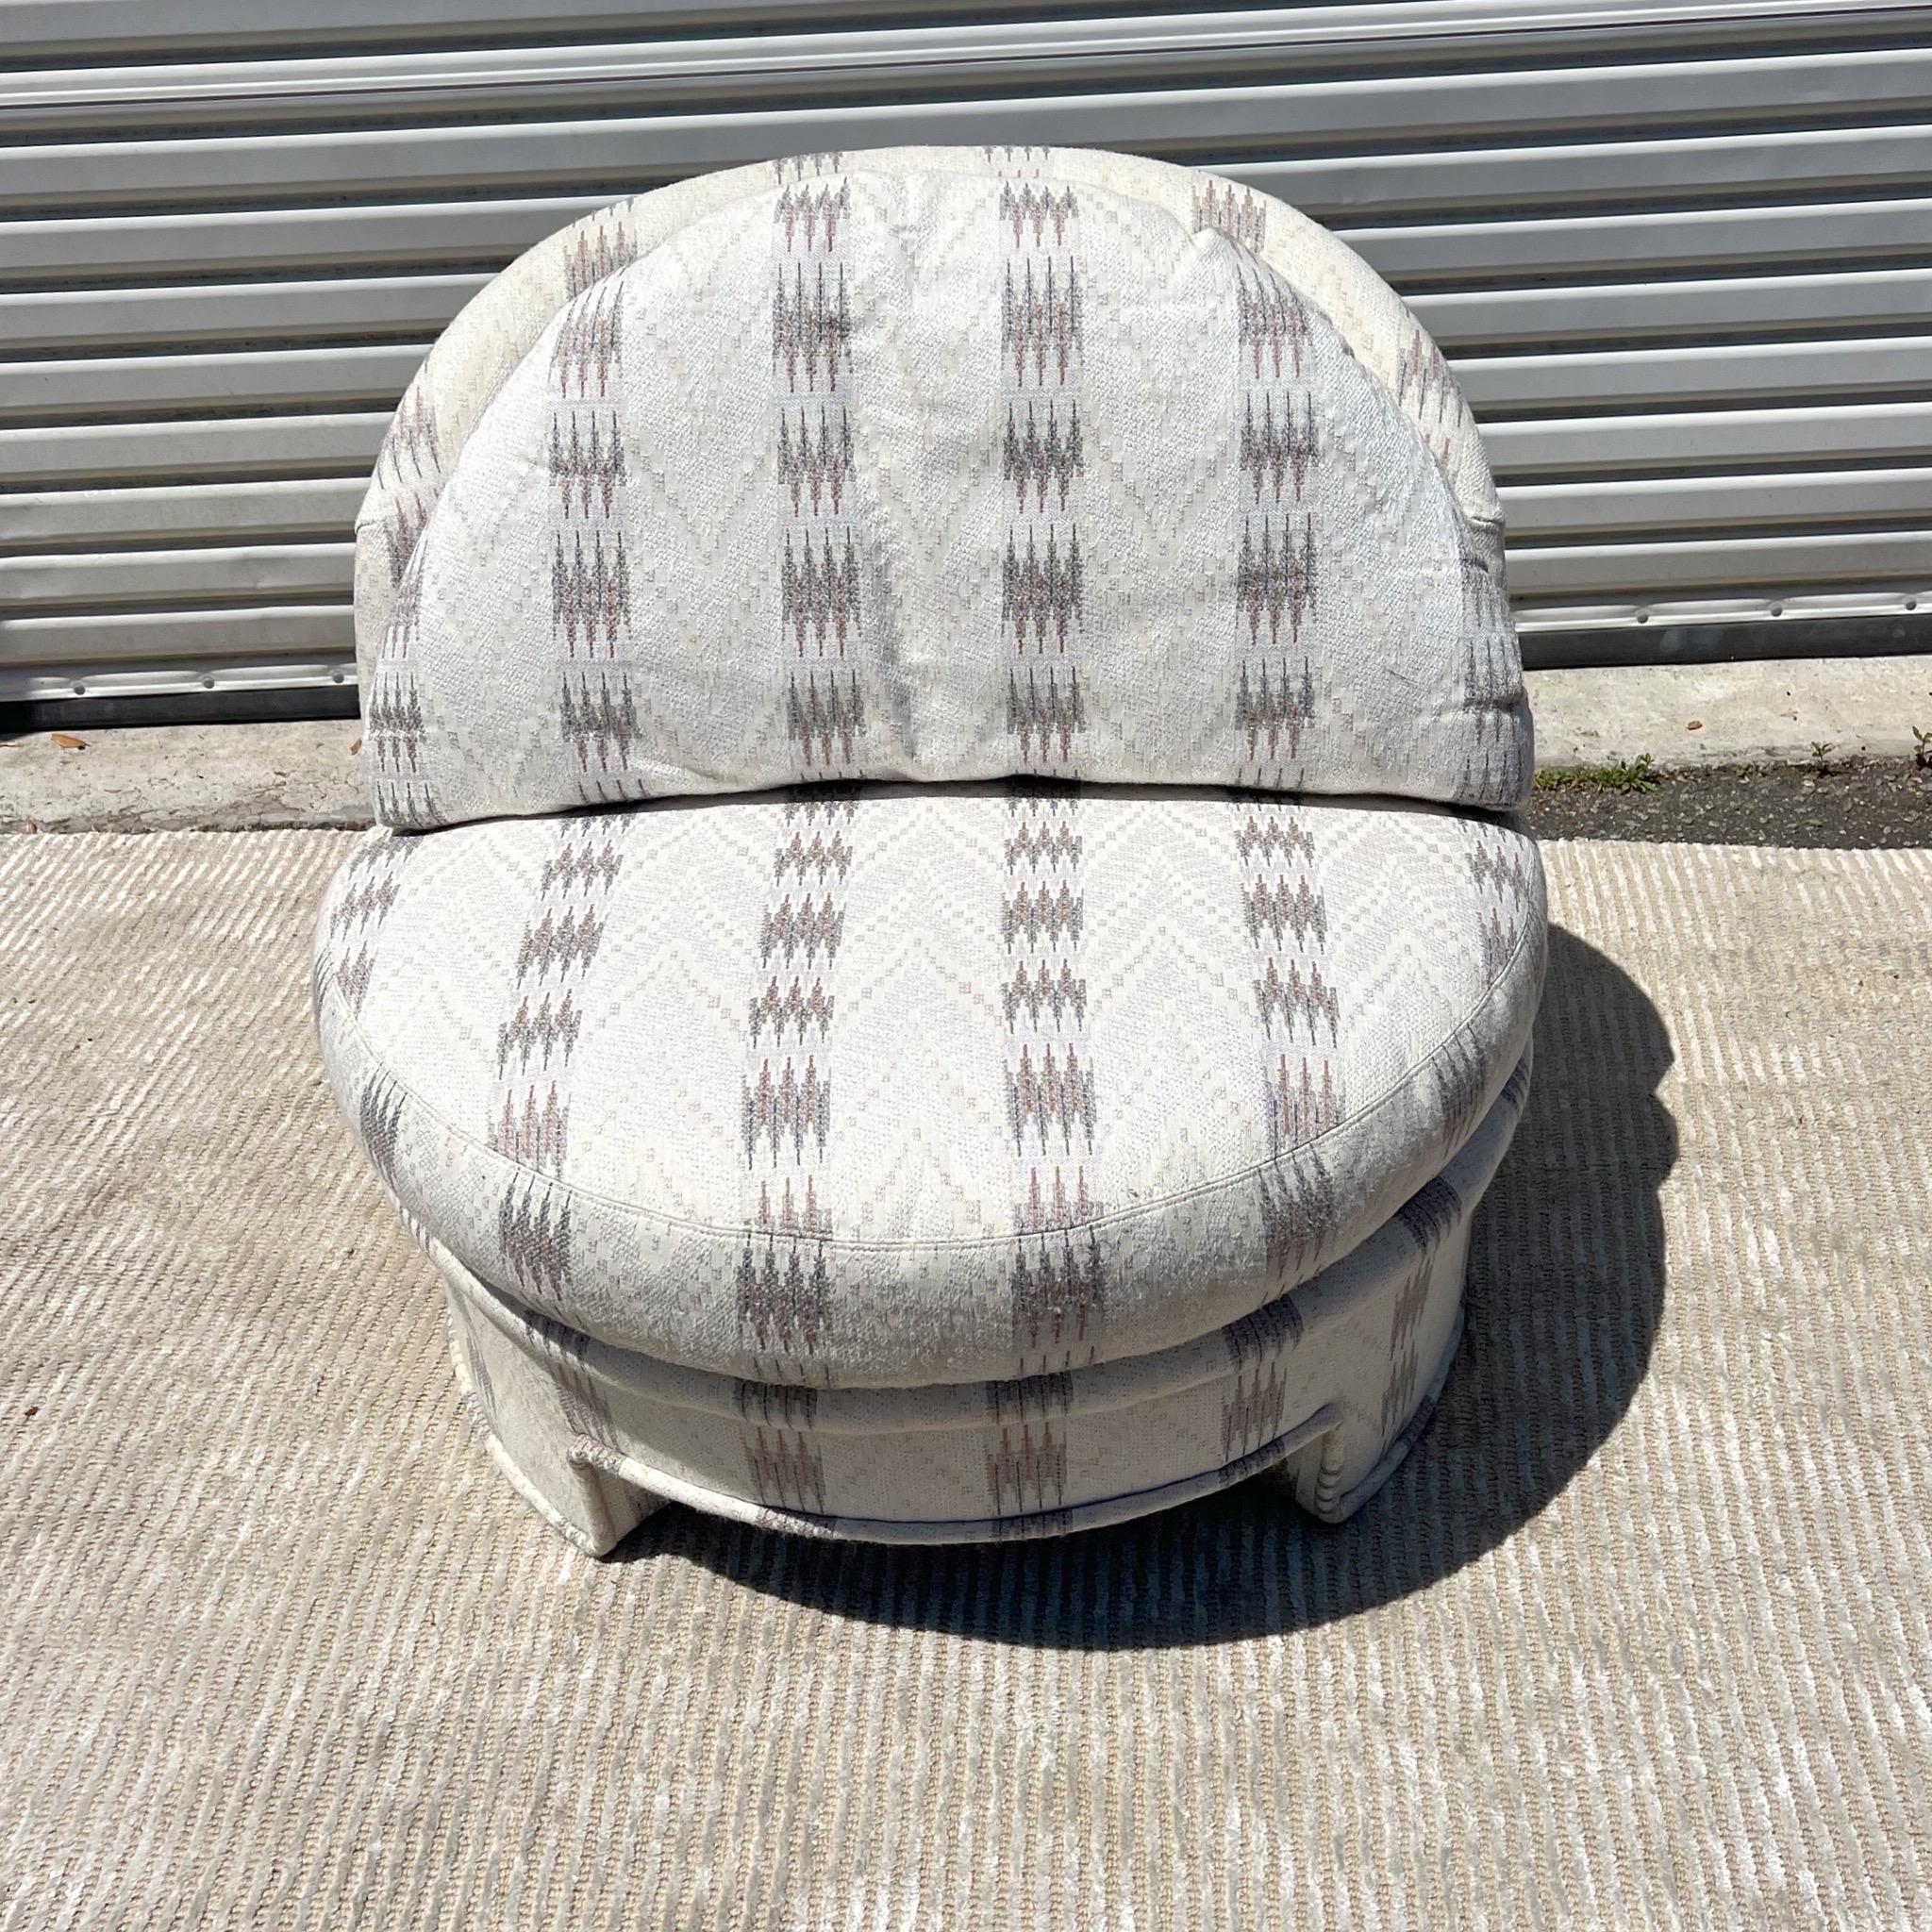 Here we have an extremely cozy half moon style accent chair with a nice looking southwestern upholstery fabric. Circa 1980’s. The cream fabric has been well taken care of a no visible stains or tears. The lines are very postmodern and the fabric